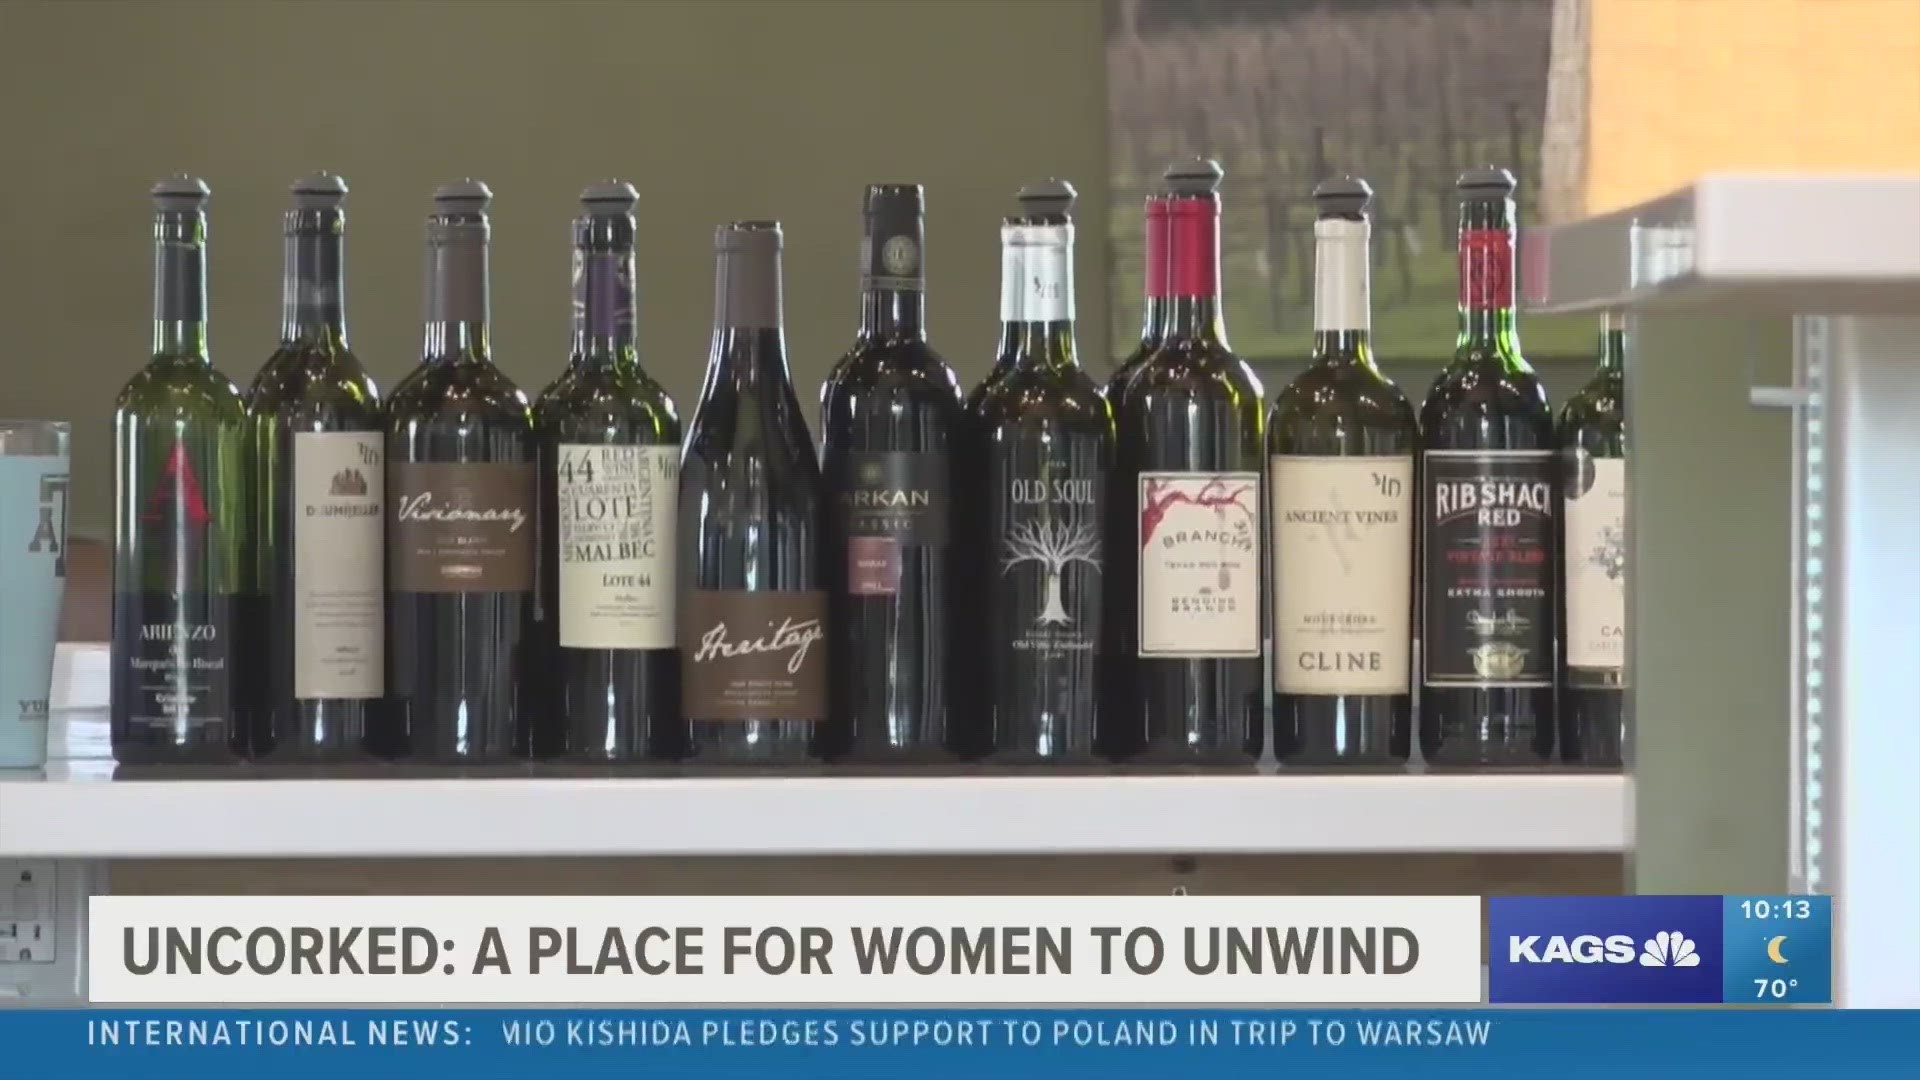 Melba Tucker, the owner of Downtown Uncorked, sat down to discuss what its like to be a longstanding female business owner and how her business has evolved.